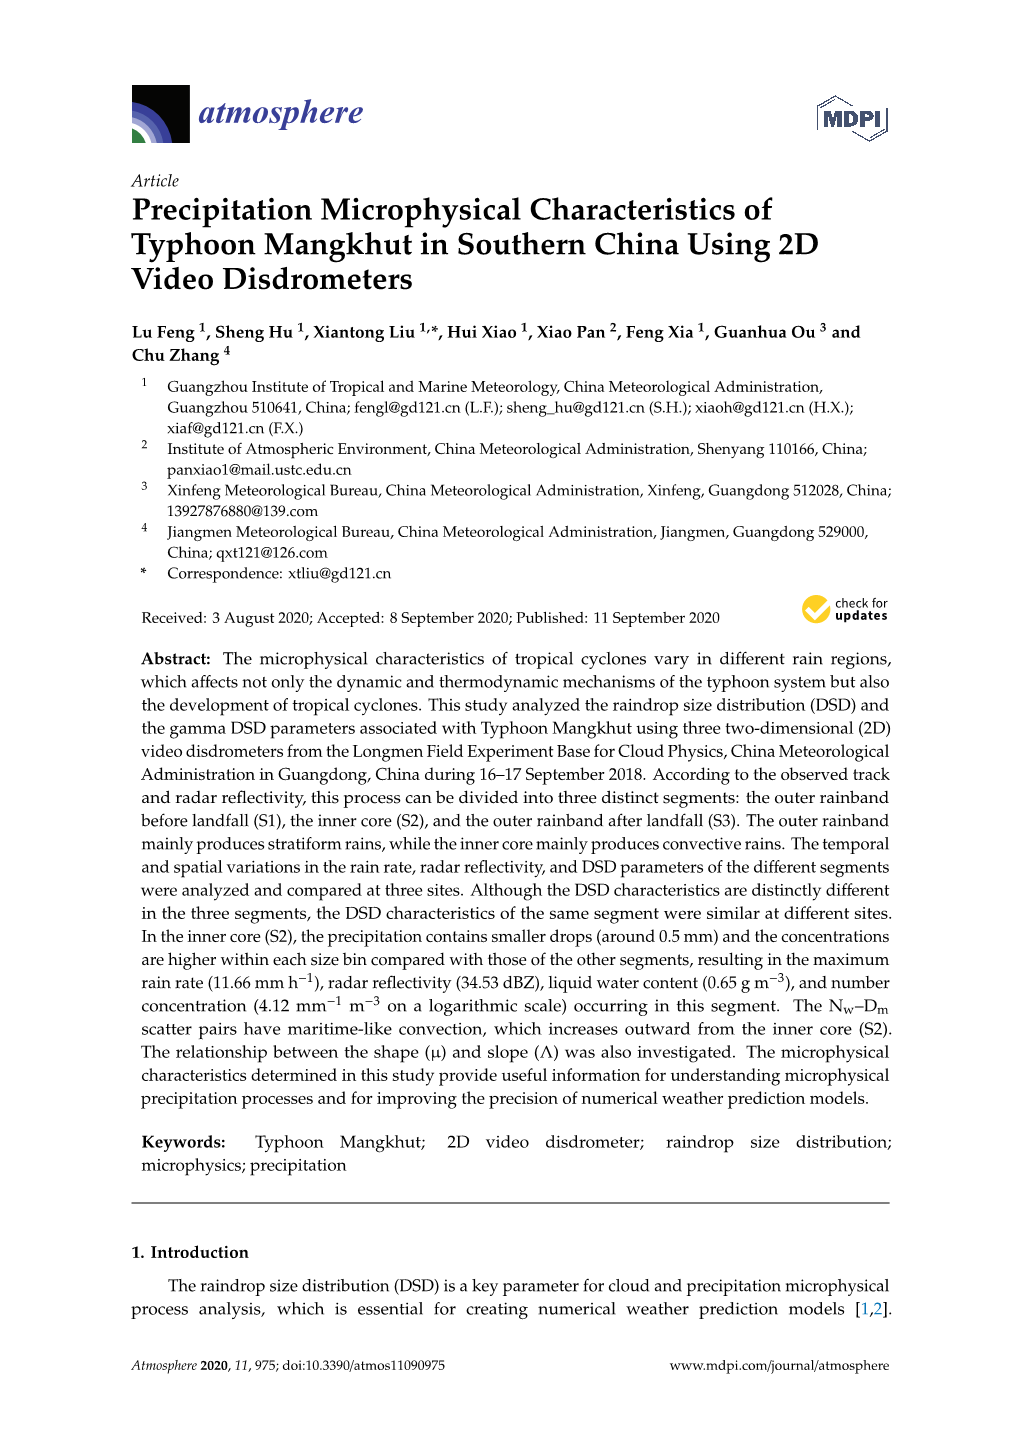 Precipitation Microphysical Characteristics of Typhoon Mangkhut in Southern China Using 2D Video Disdrometers